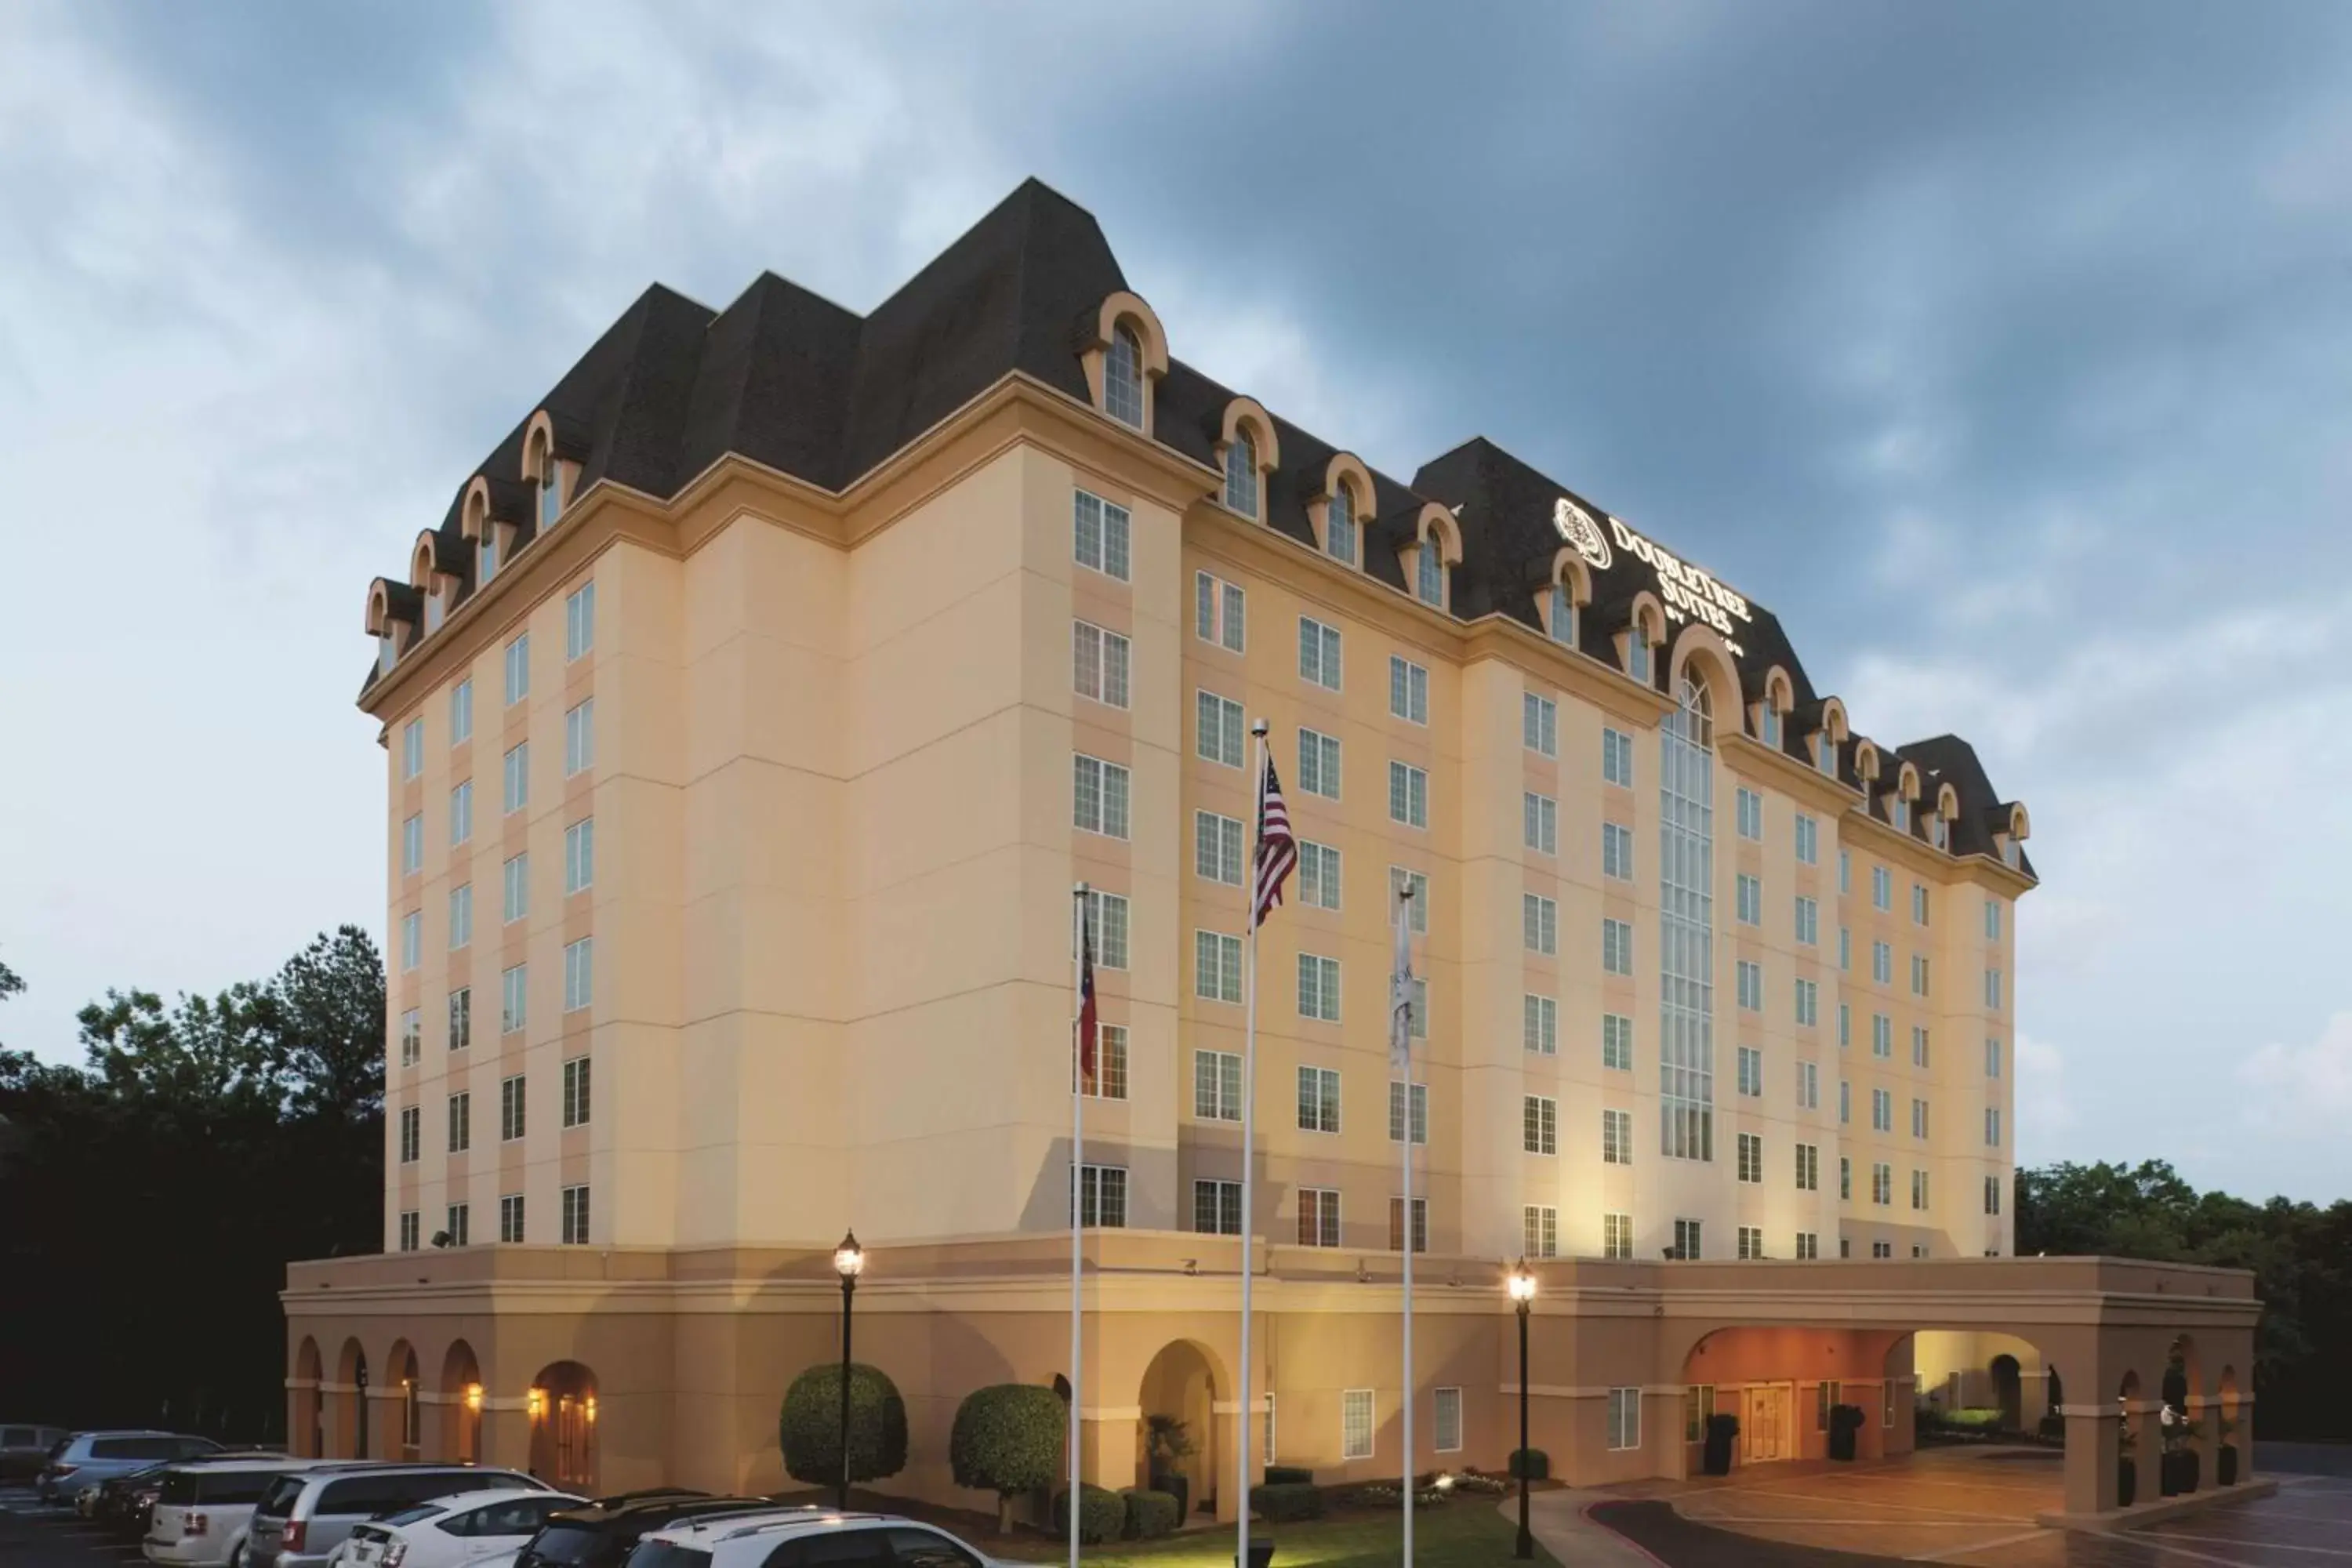 Property Building in Doubletree Suites by Hilton at The Battery Atlanta